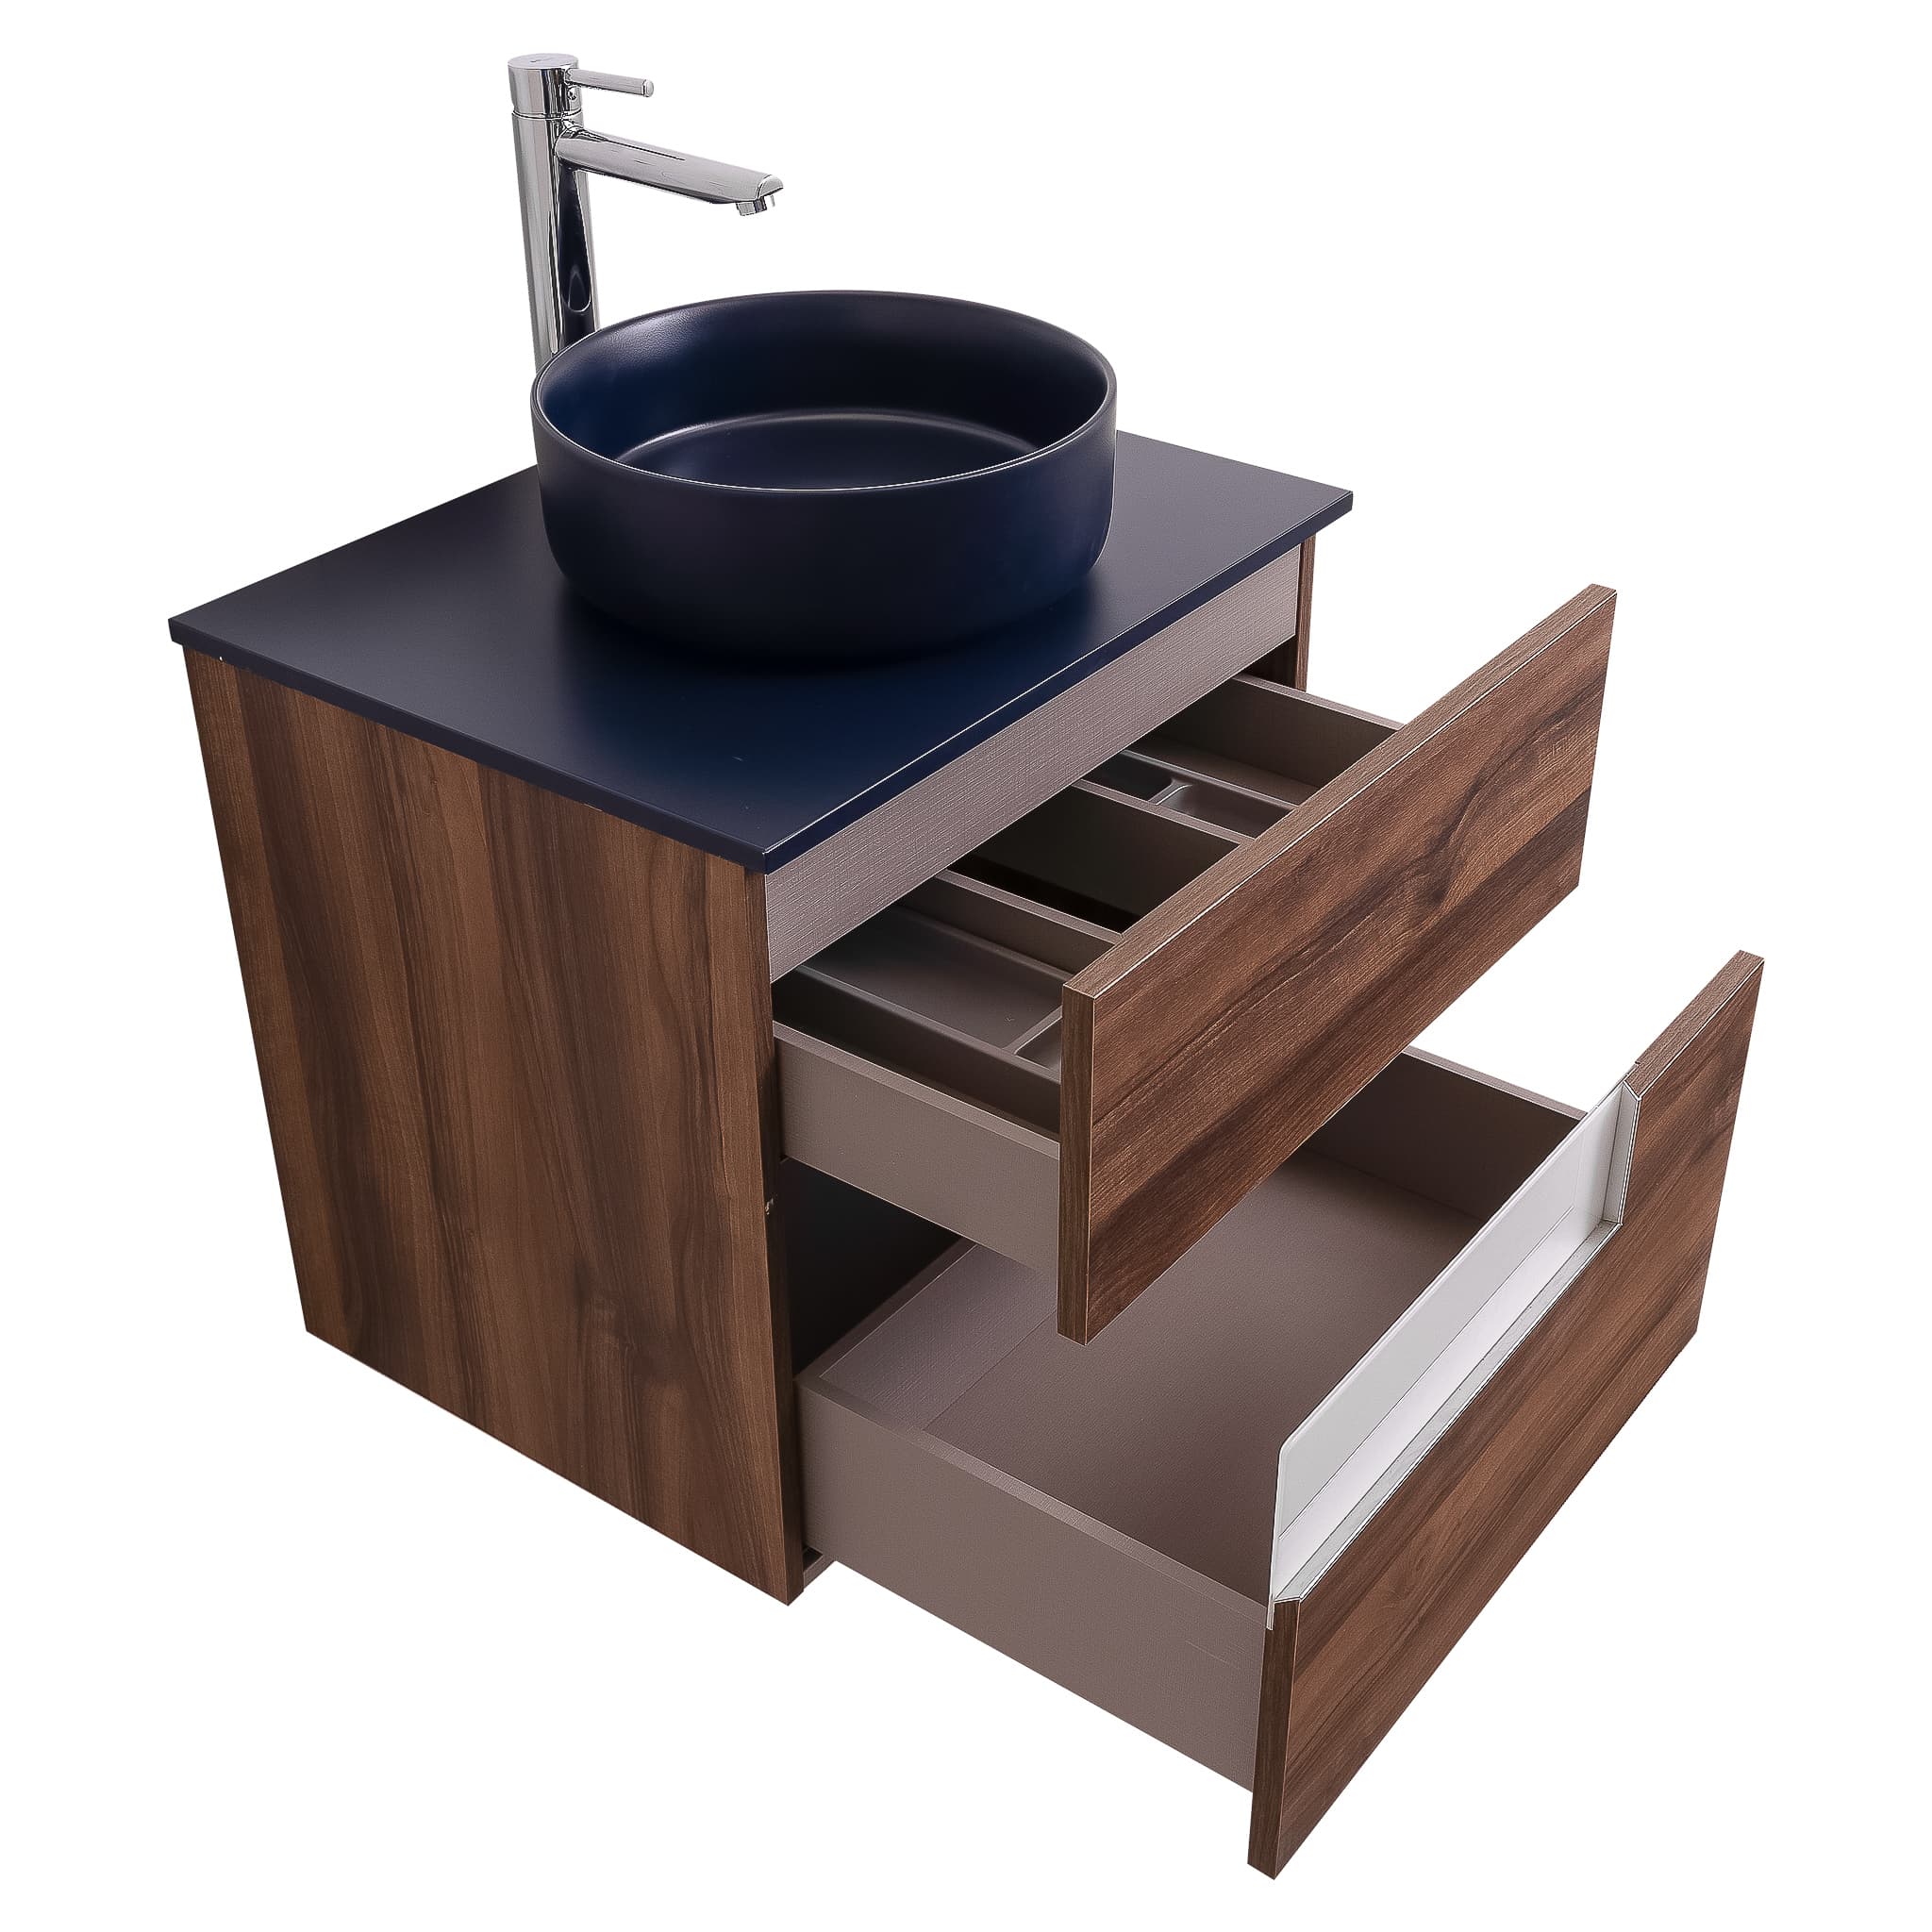 Vision 23.5 Valenti Medium Brown Wood Cabinet, Ares Navy Blue Top And Ares Navy Blue Ceramic Basin, Wall Mounted Modern Vanity Set